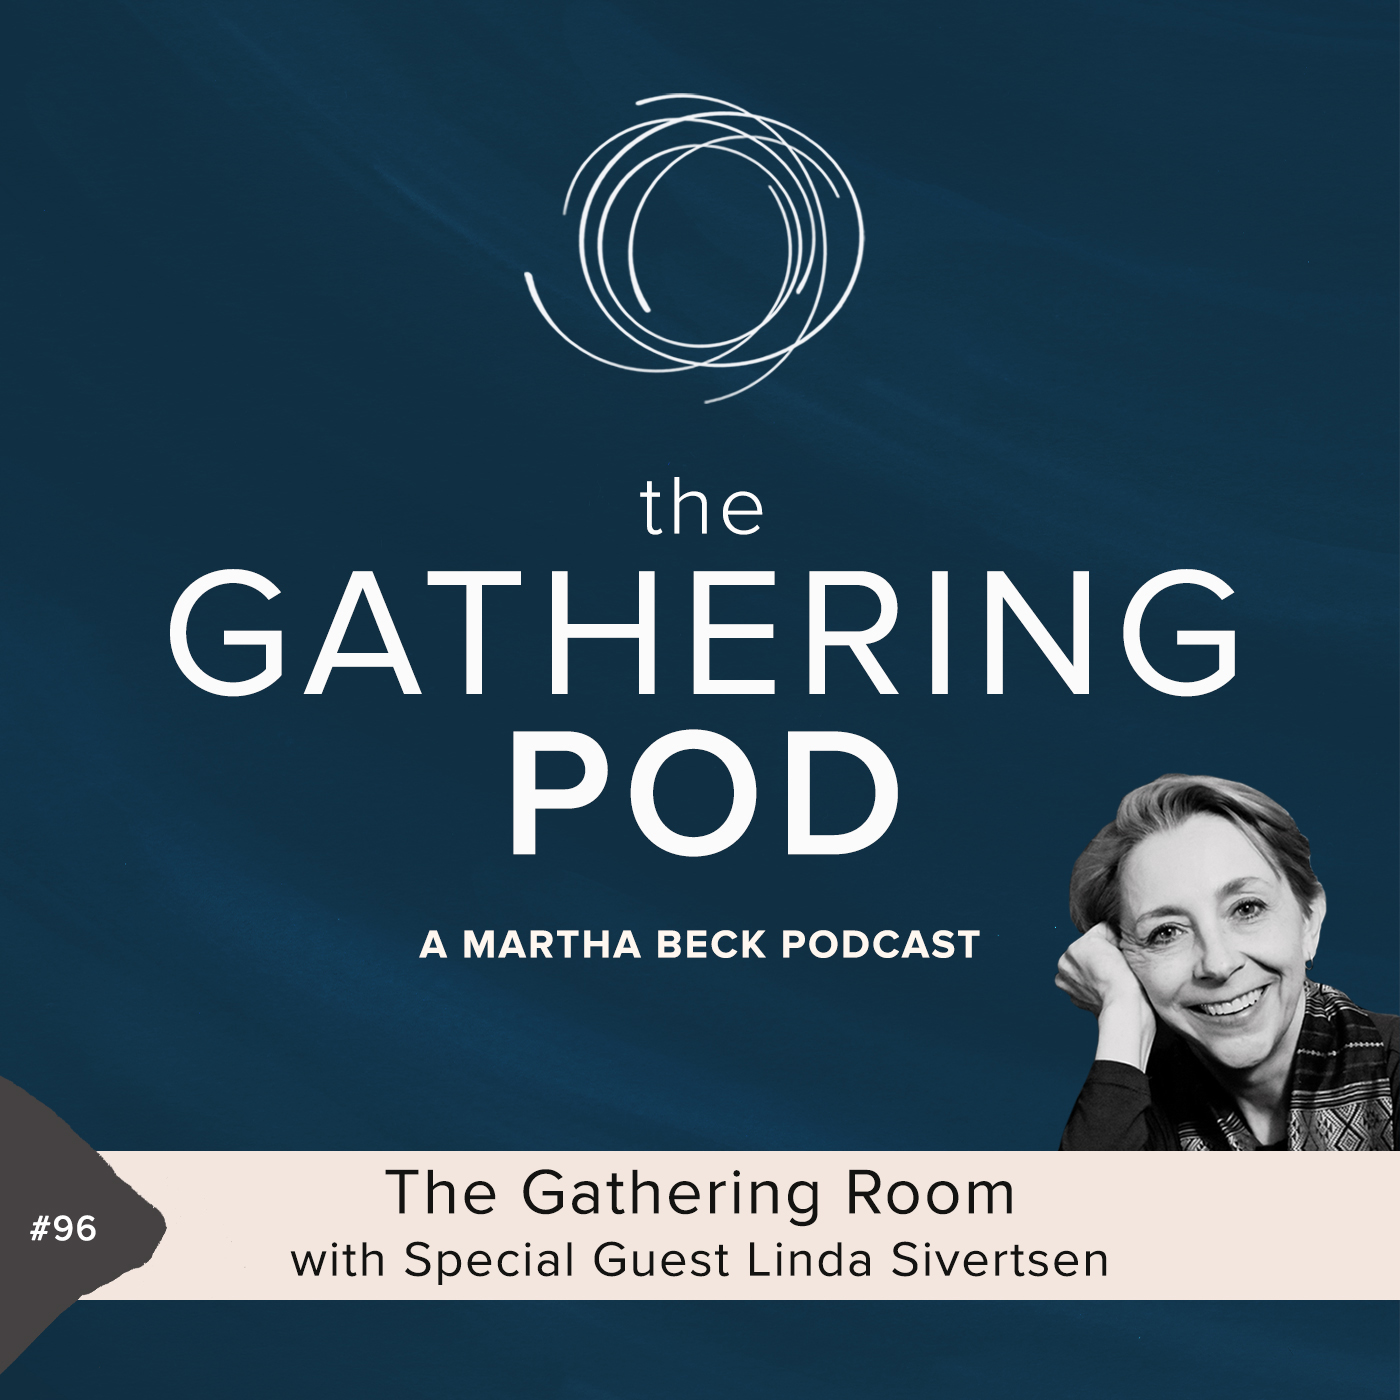 Image for The Gathering Pod A Martha Beck Podcast Episode #96 The Gathering Room with Special Guest Linda Sivertsen